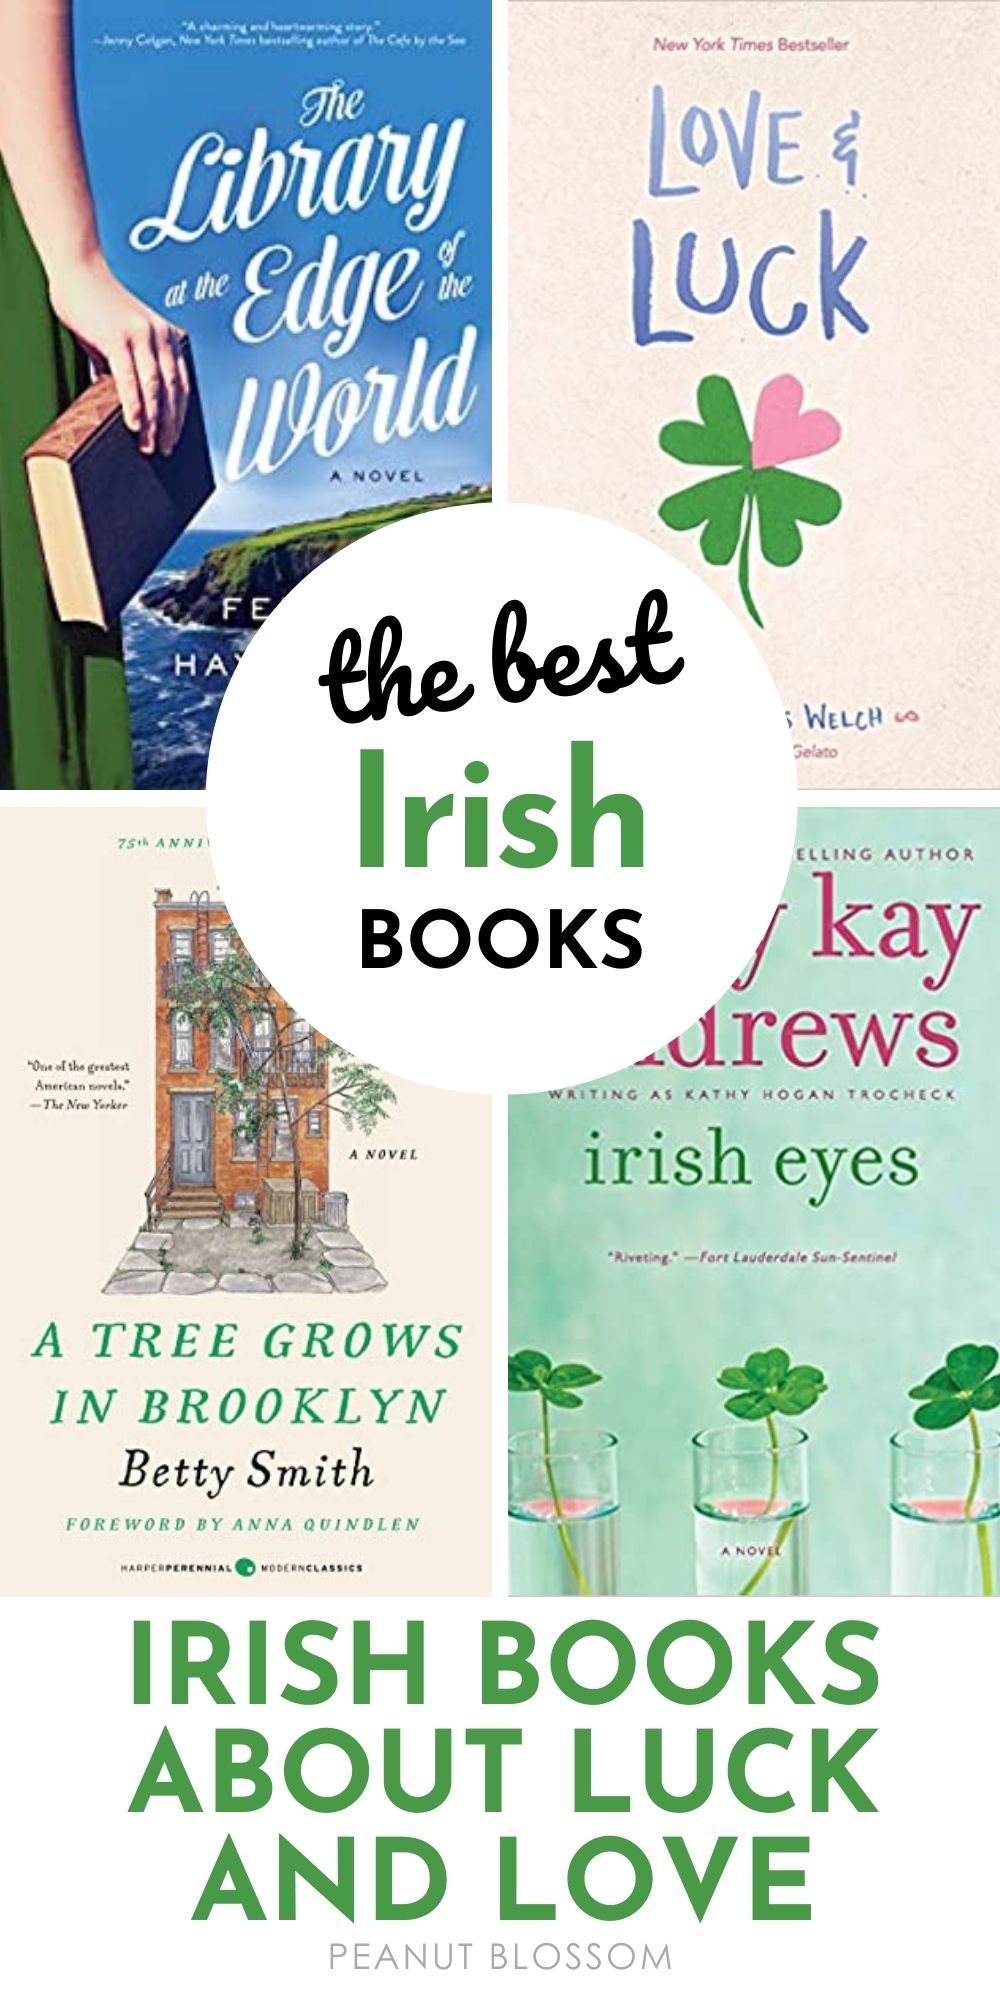 Collage of four books Irish Eyes, A Tree Grows in Brooklyn, The Library at the Edge of the World, and Love and Luck with text The Best Irish Books, Irish Books about luck and love.